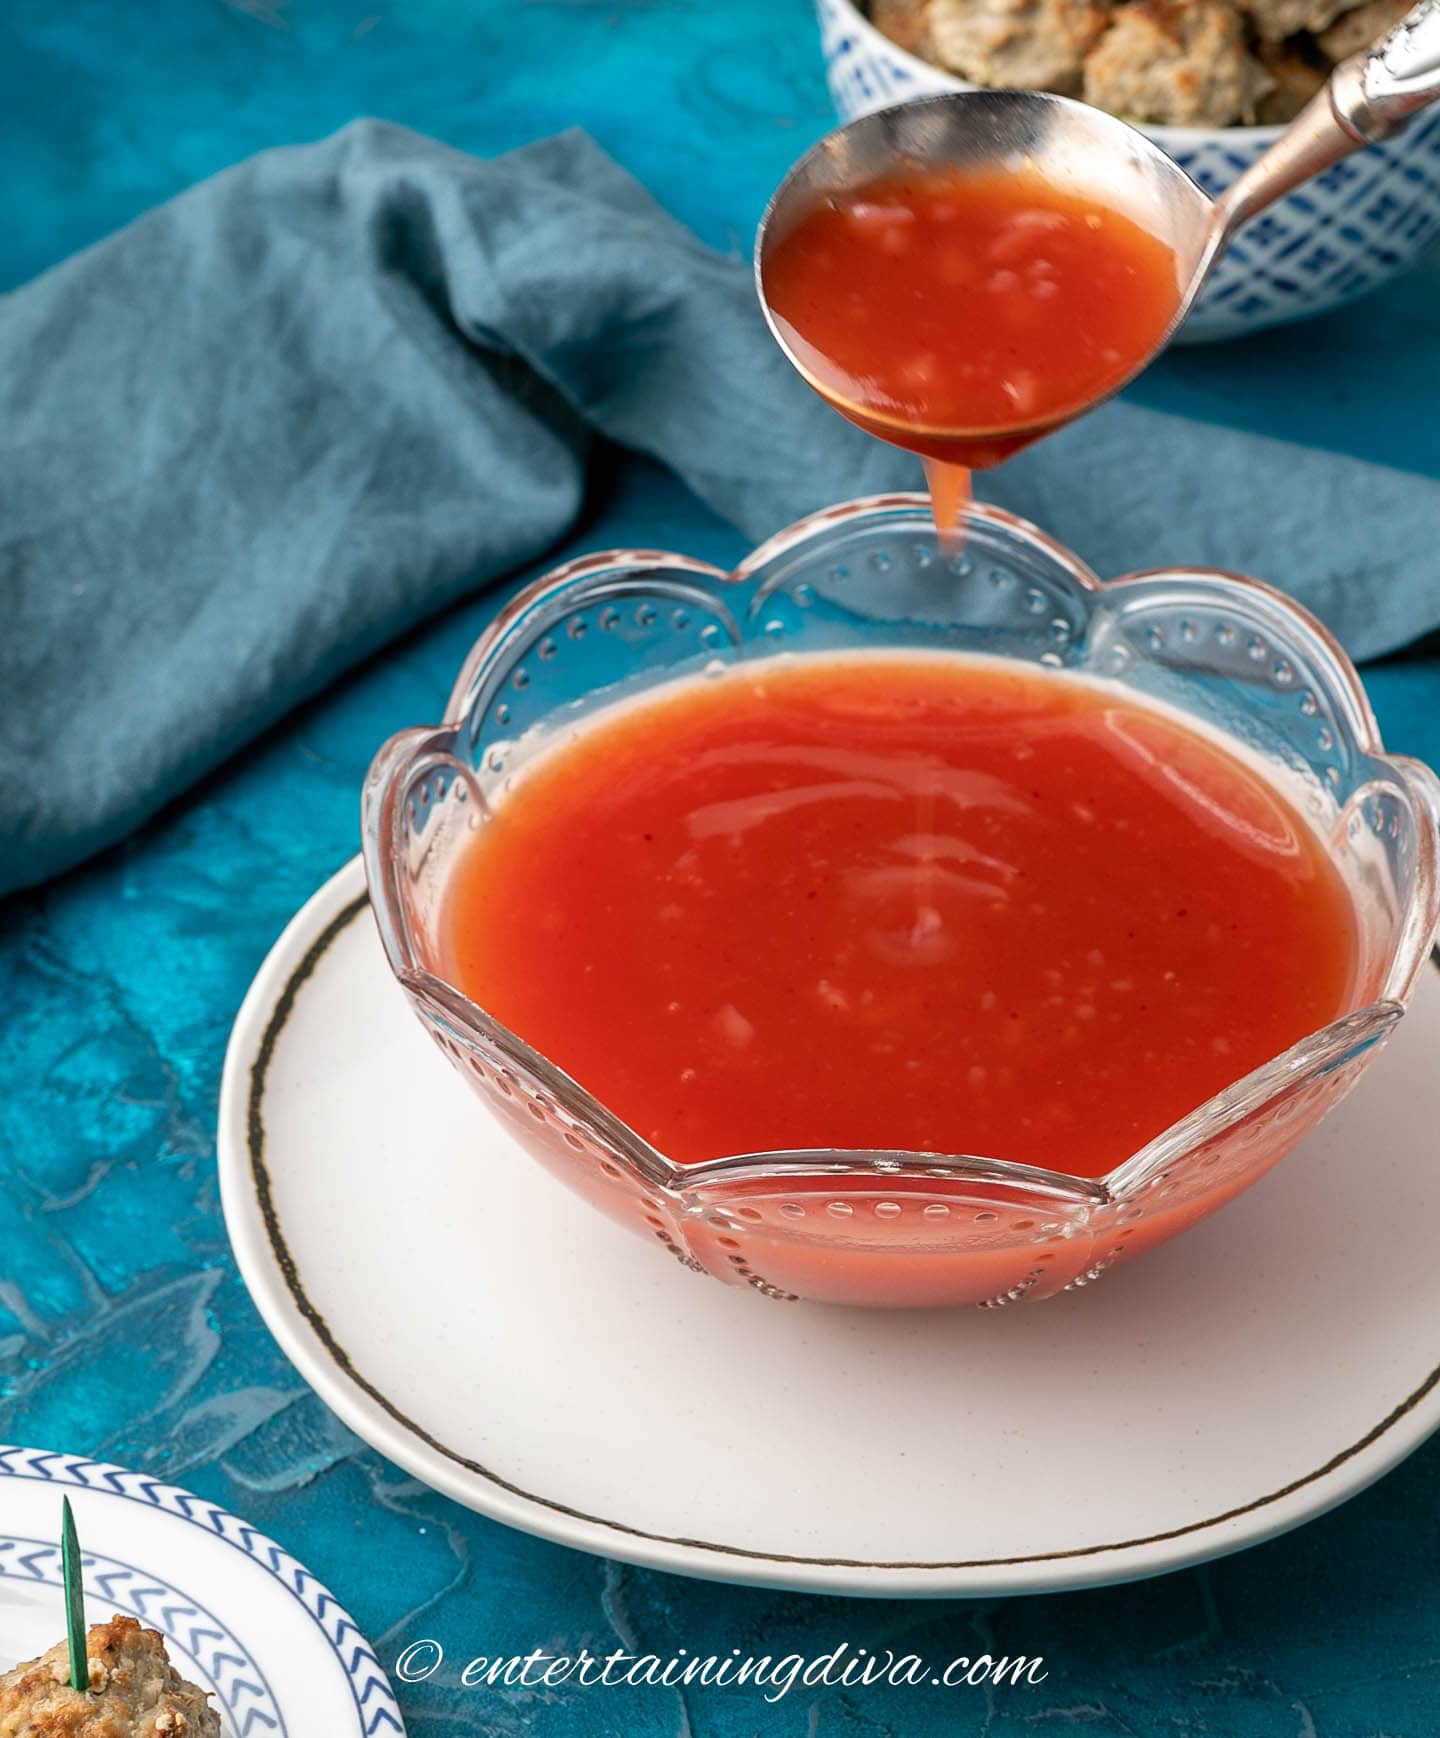 Sweet and sour sauce being spooned out of a bowl